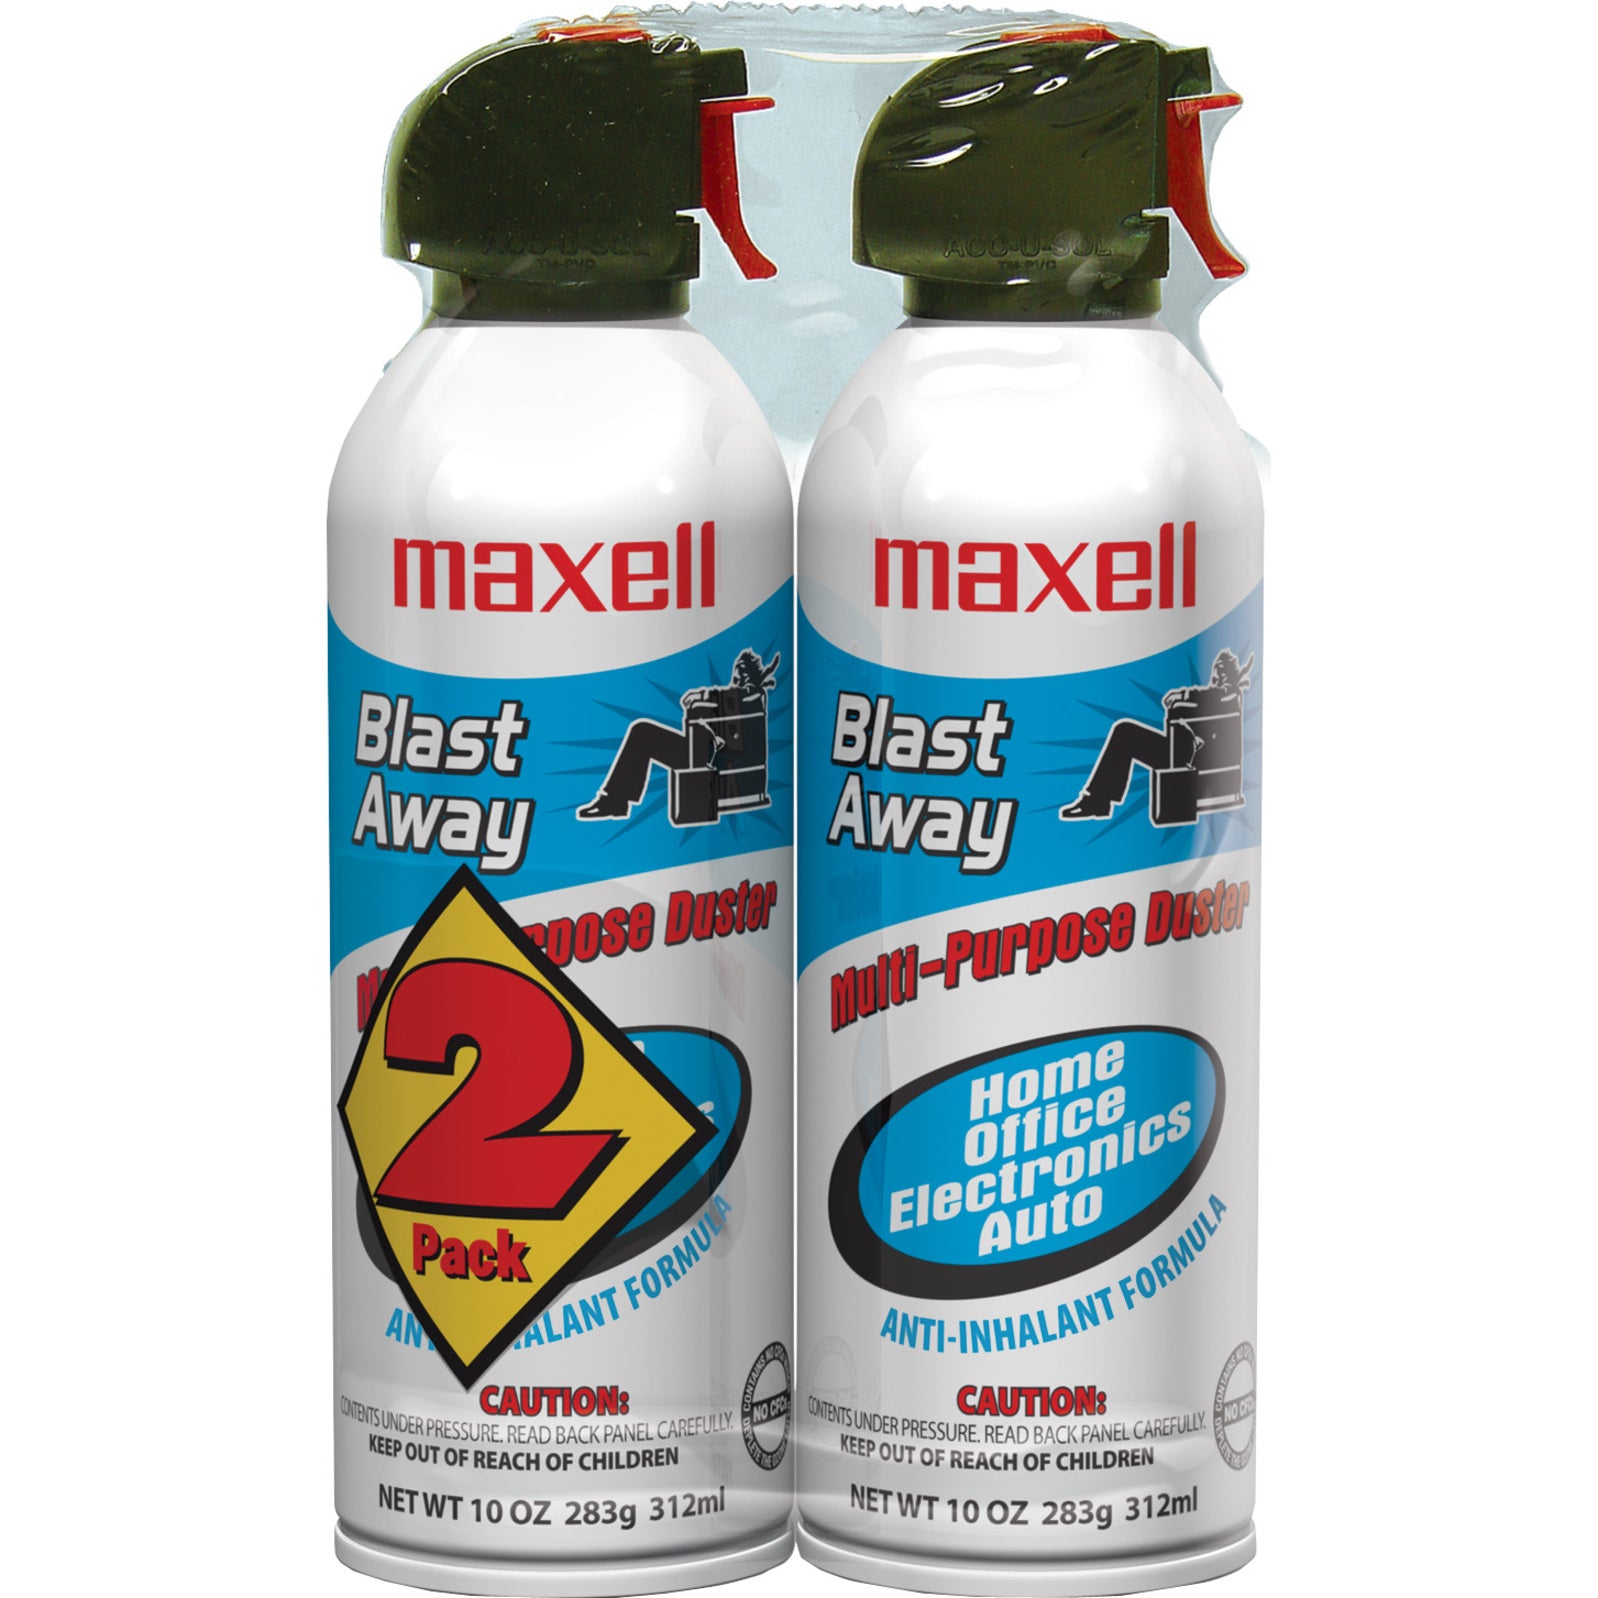 Maxell 190026 Blast Away Canned Air Duster 2 Pack, Dust Remover, Dirt Remover, Keyboard, Electronic Equipment